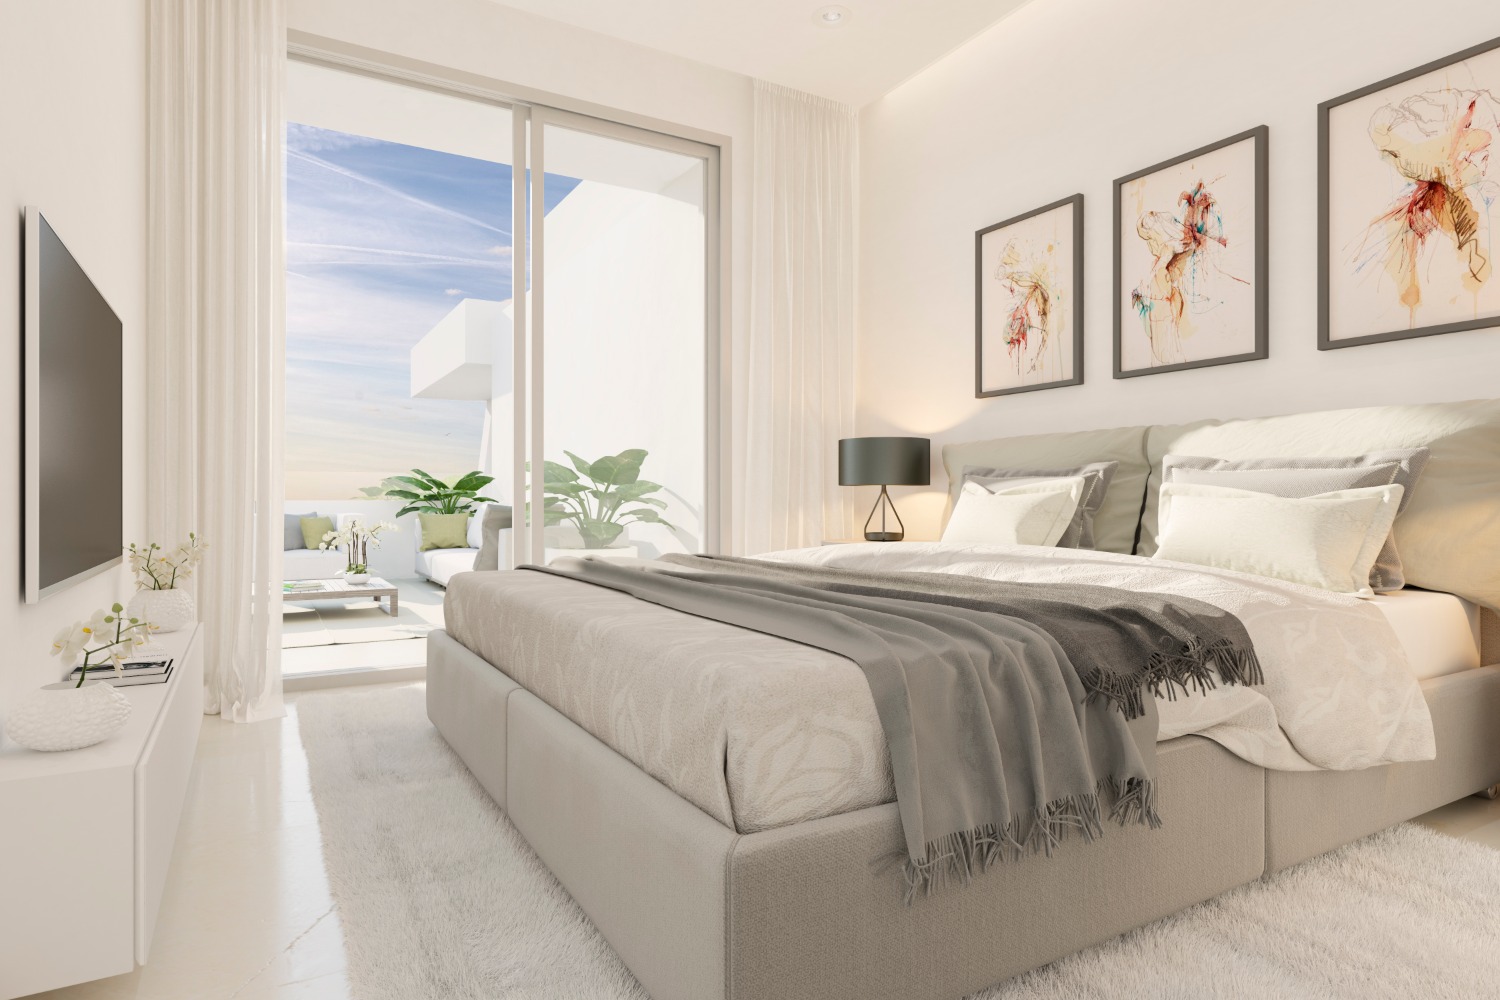 New construction on the new Golden Mile of Estepona 5 minutes from Sonora Beach